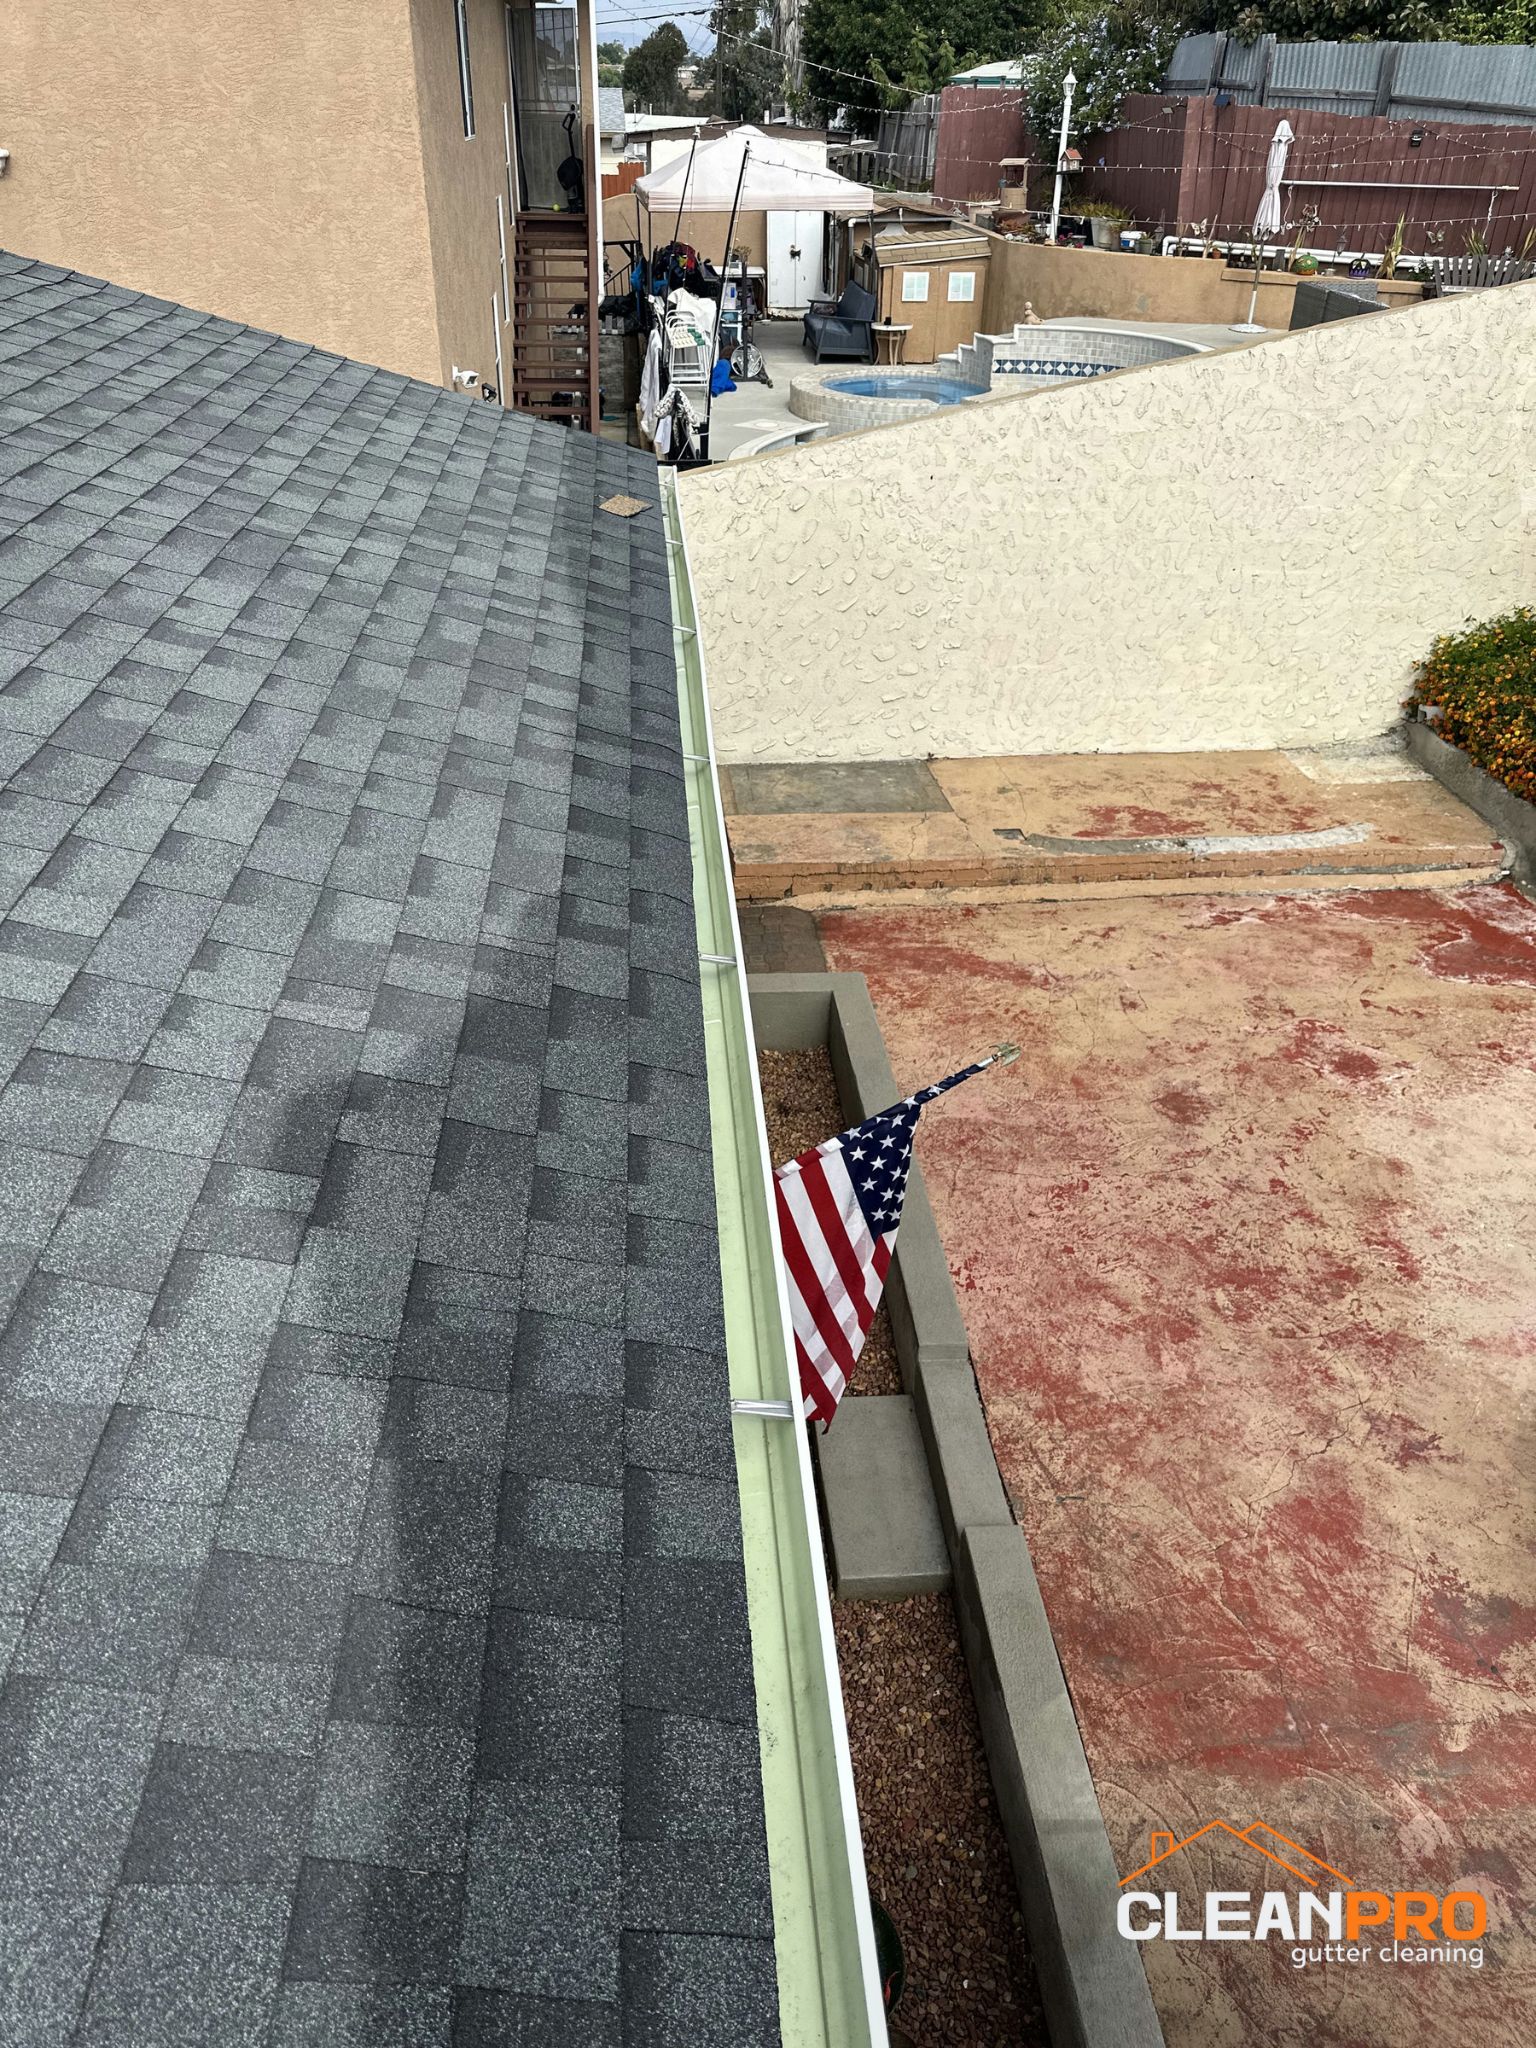 Residential Gutter Cleaning in Richmond VA